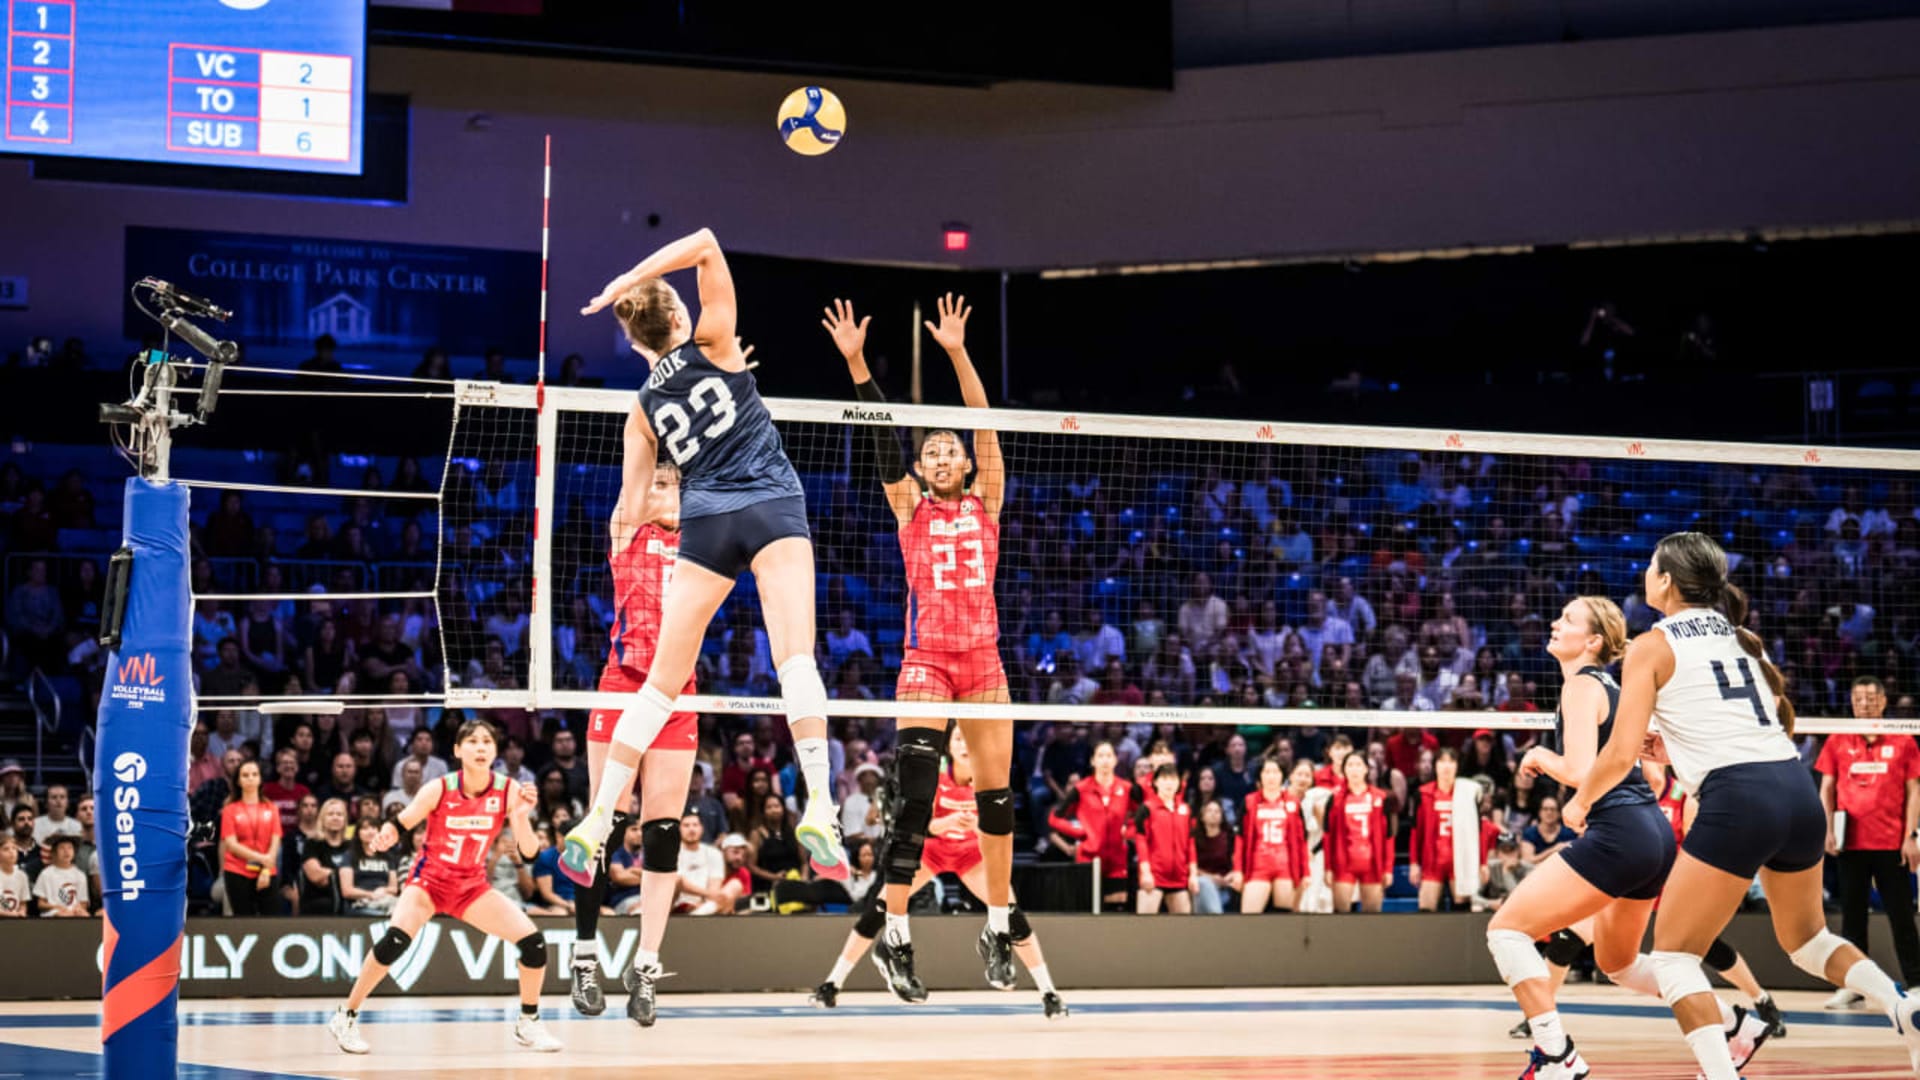 volleyball nations league 2022 tv coverage